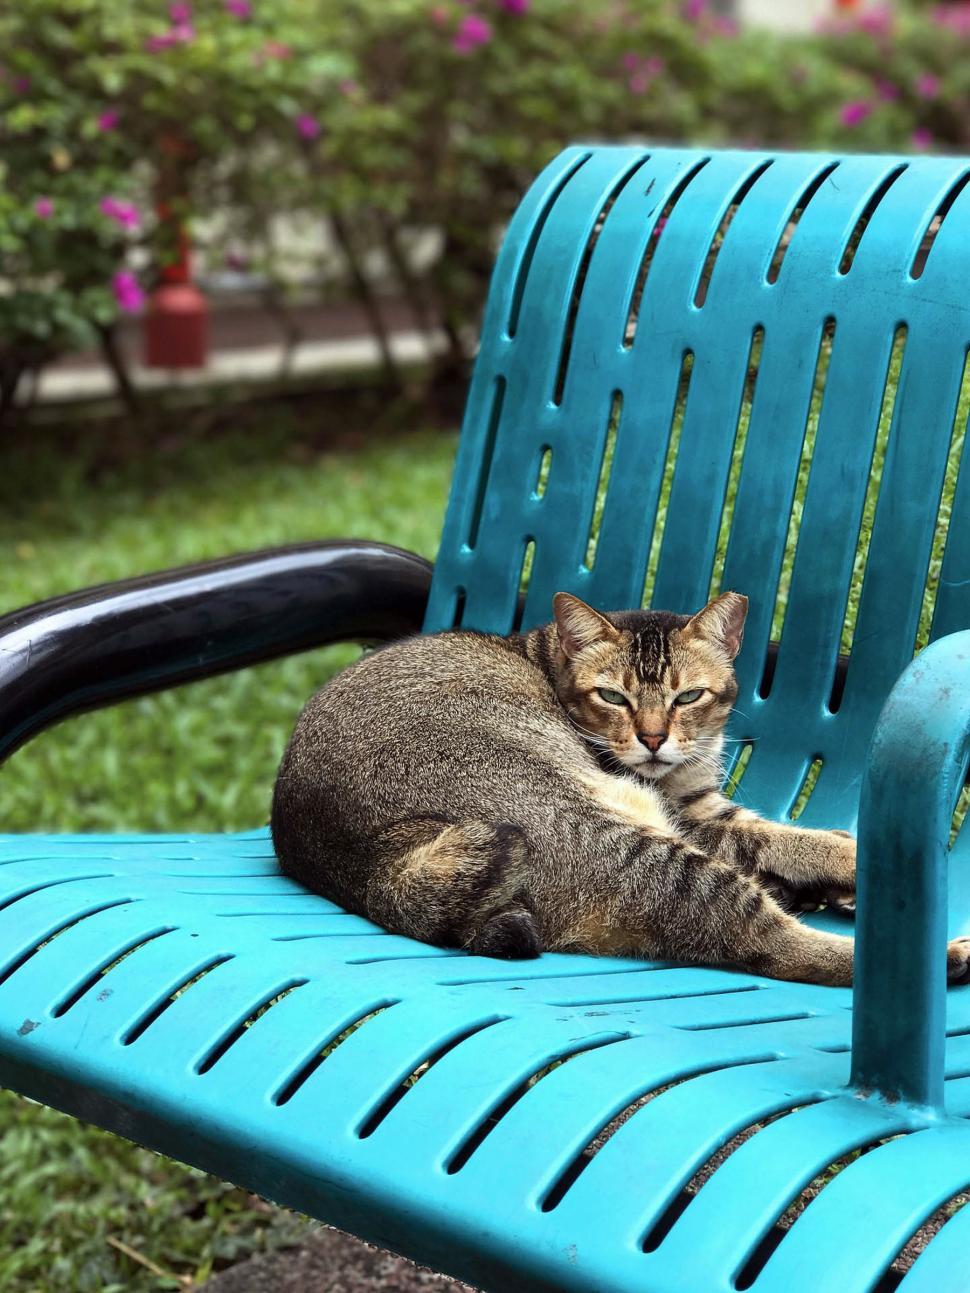 Free Image of A Cat Resting on a Blue Bench 